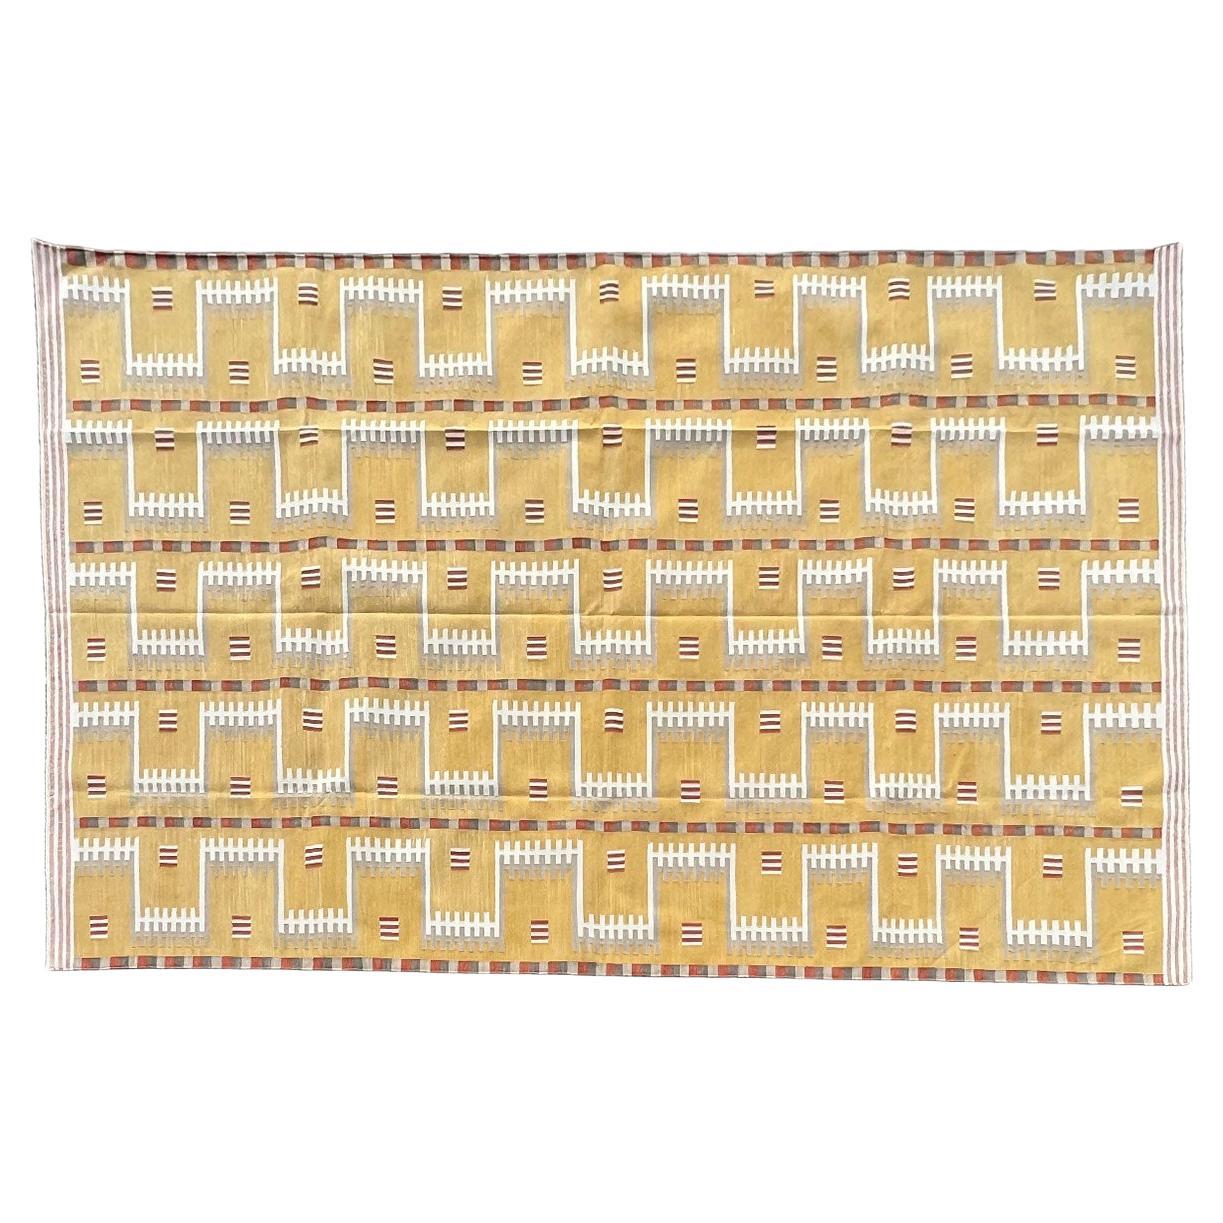 Cotton Natural Vegetable Dyed, Mustard, Cream & Beige Geometric Indian Dhurrie-7'x10'
These special flat-weave dhurries are hand-woven with 15 ply 100% cotton yarn. Due to the special manufacturing techniques used to create our rugs, the size and